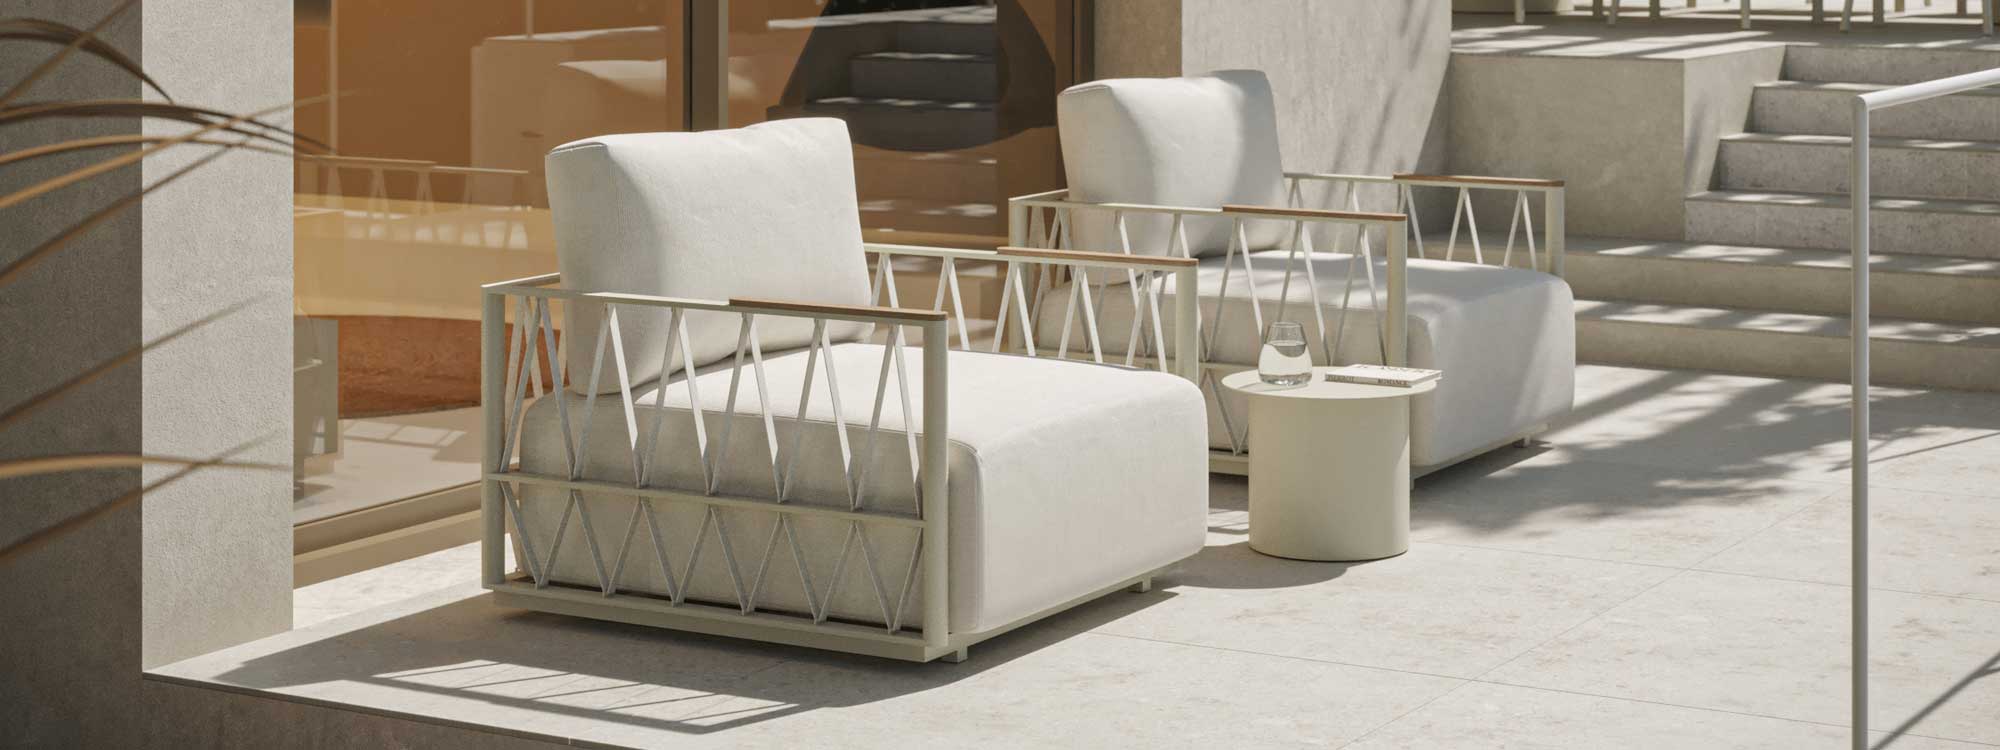 Image showing webbed sides and teak armrests of Ava luxury garden chairs by Oiside